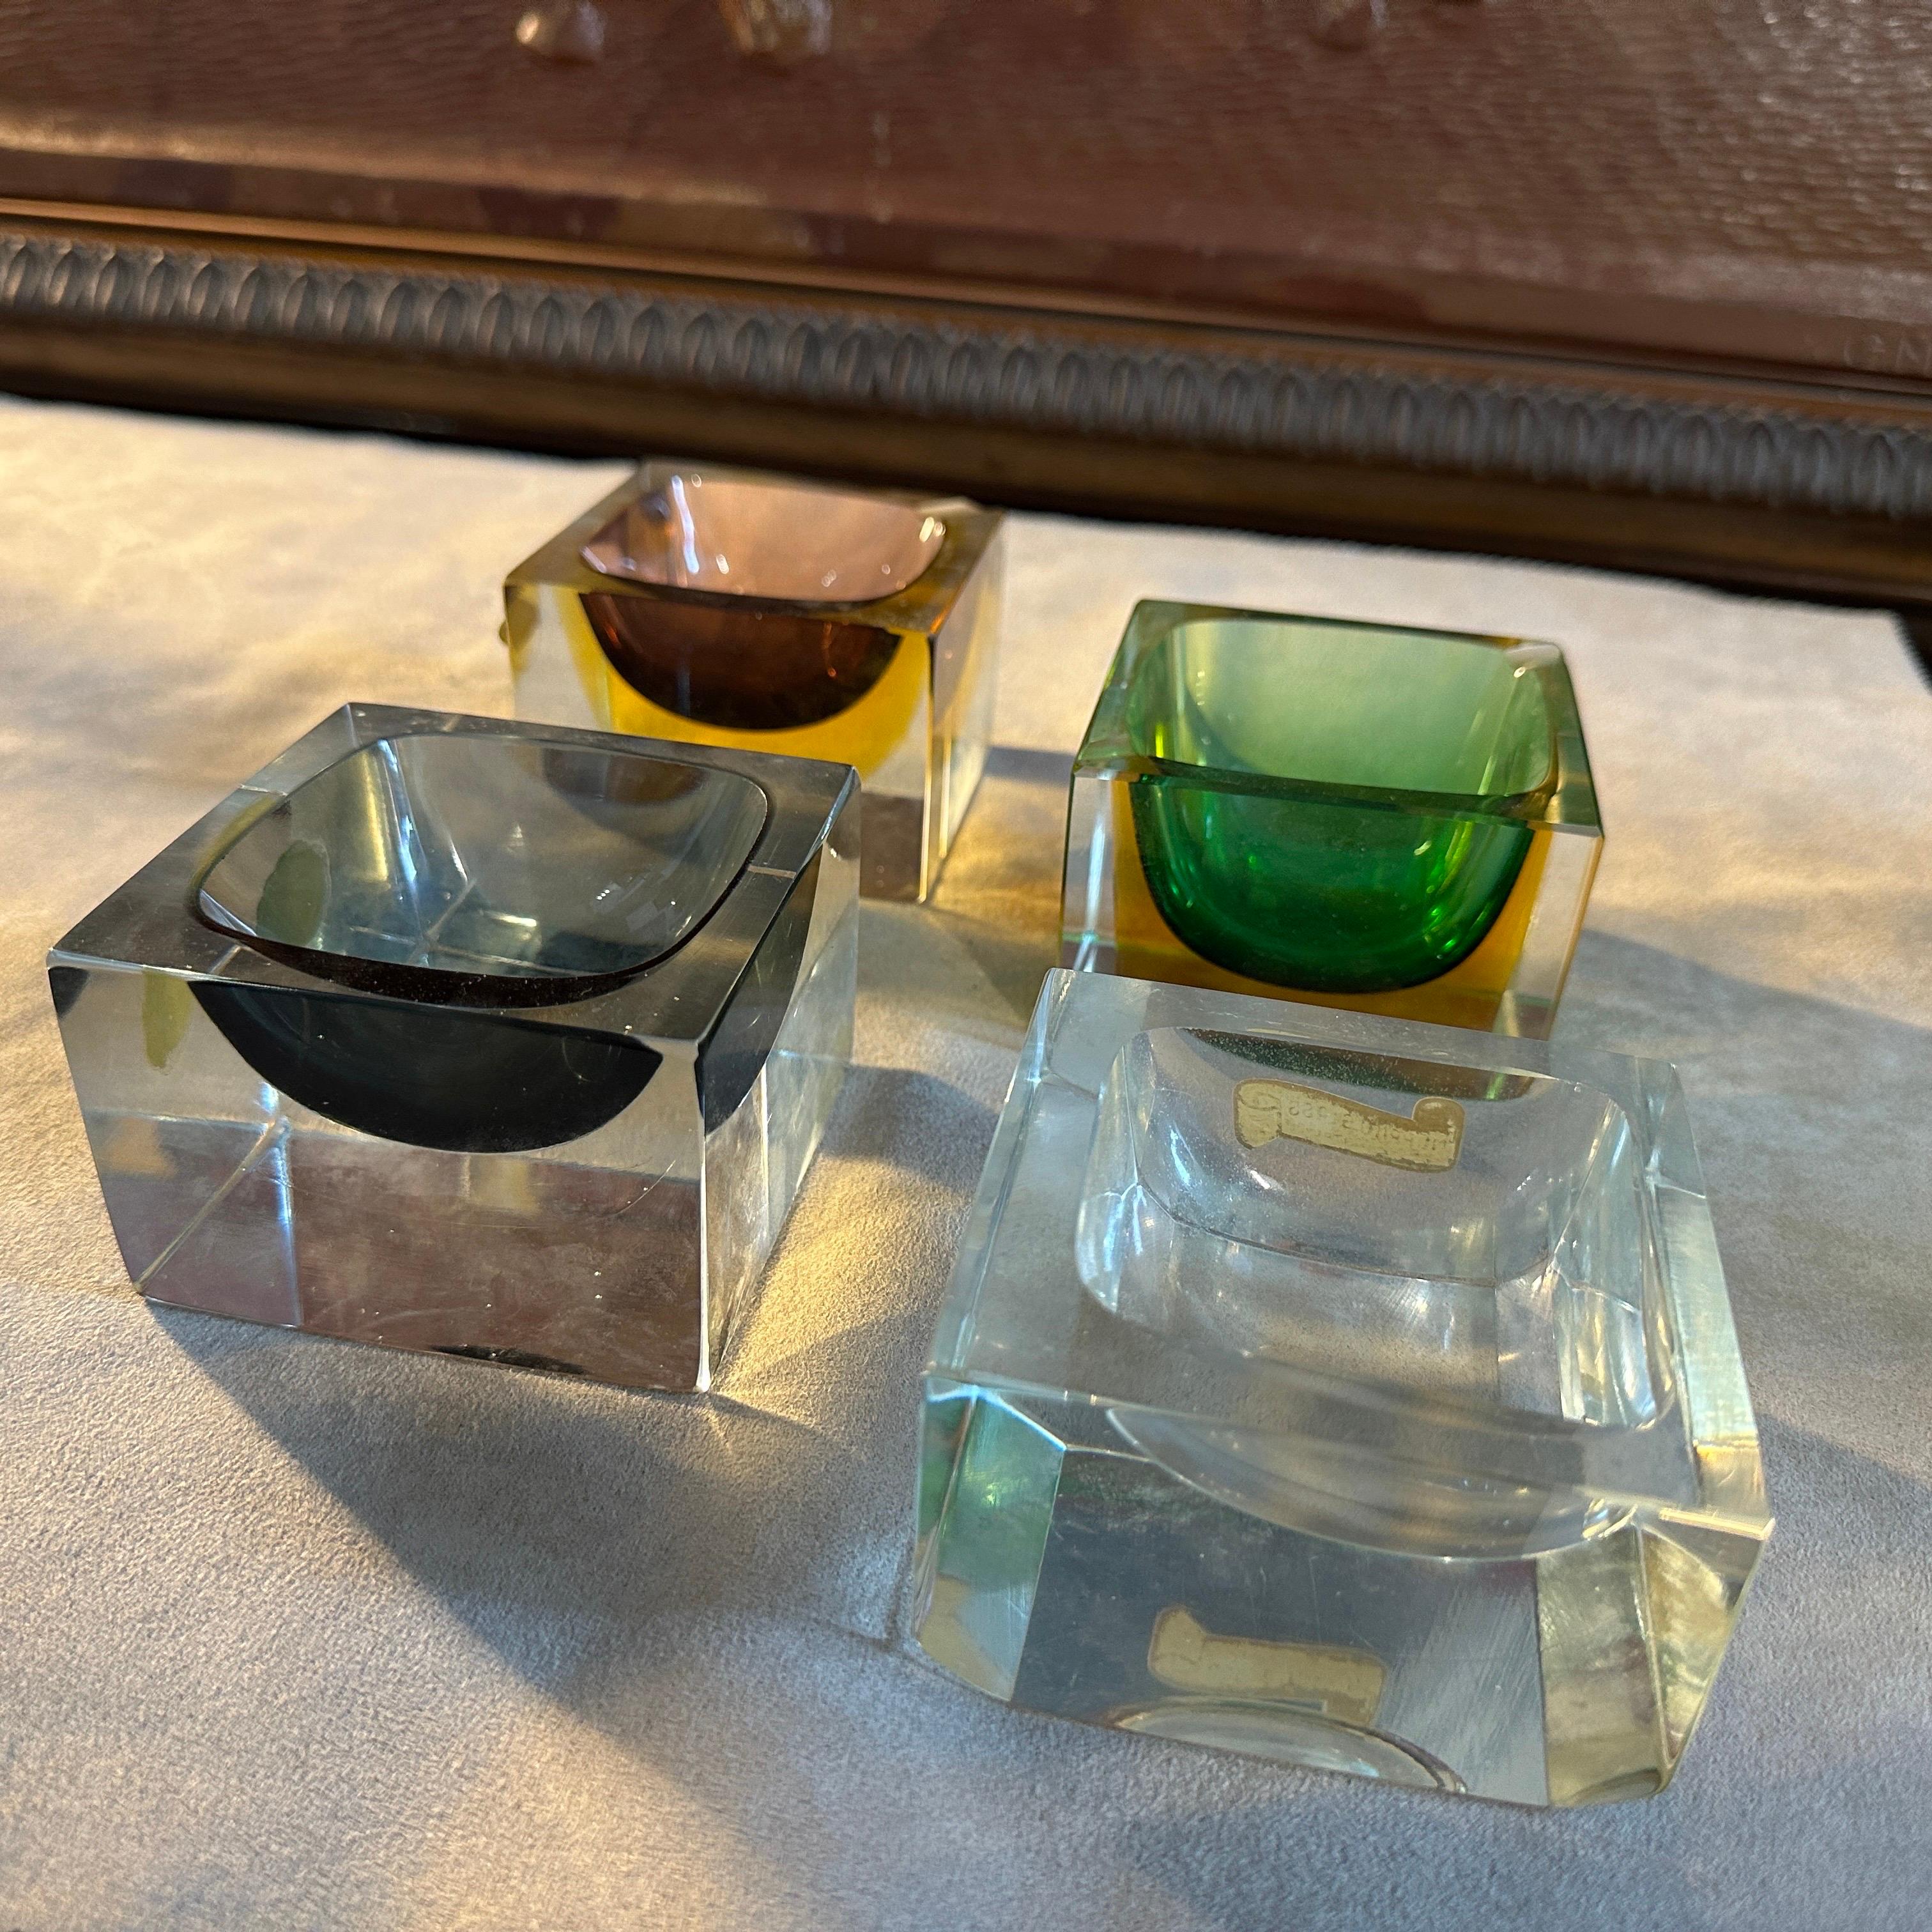 These Square Ashtrays designed and manufactured in Venice in the Seventies represents a harmonious fusion of form, color, and craftsmanship characteristic of the Murano glassmaking tradition.
Each ashtray in the set features the iconic Sommerso